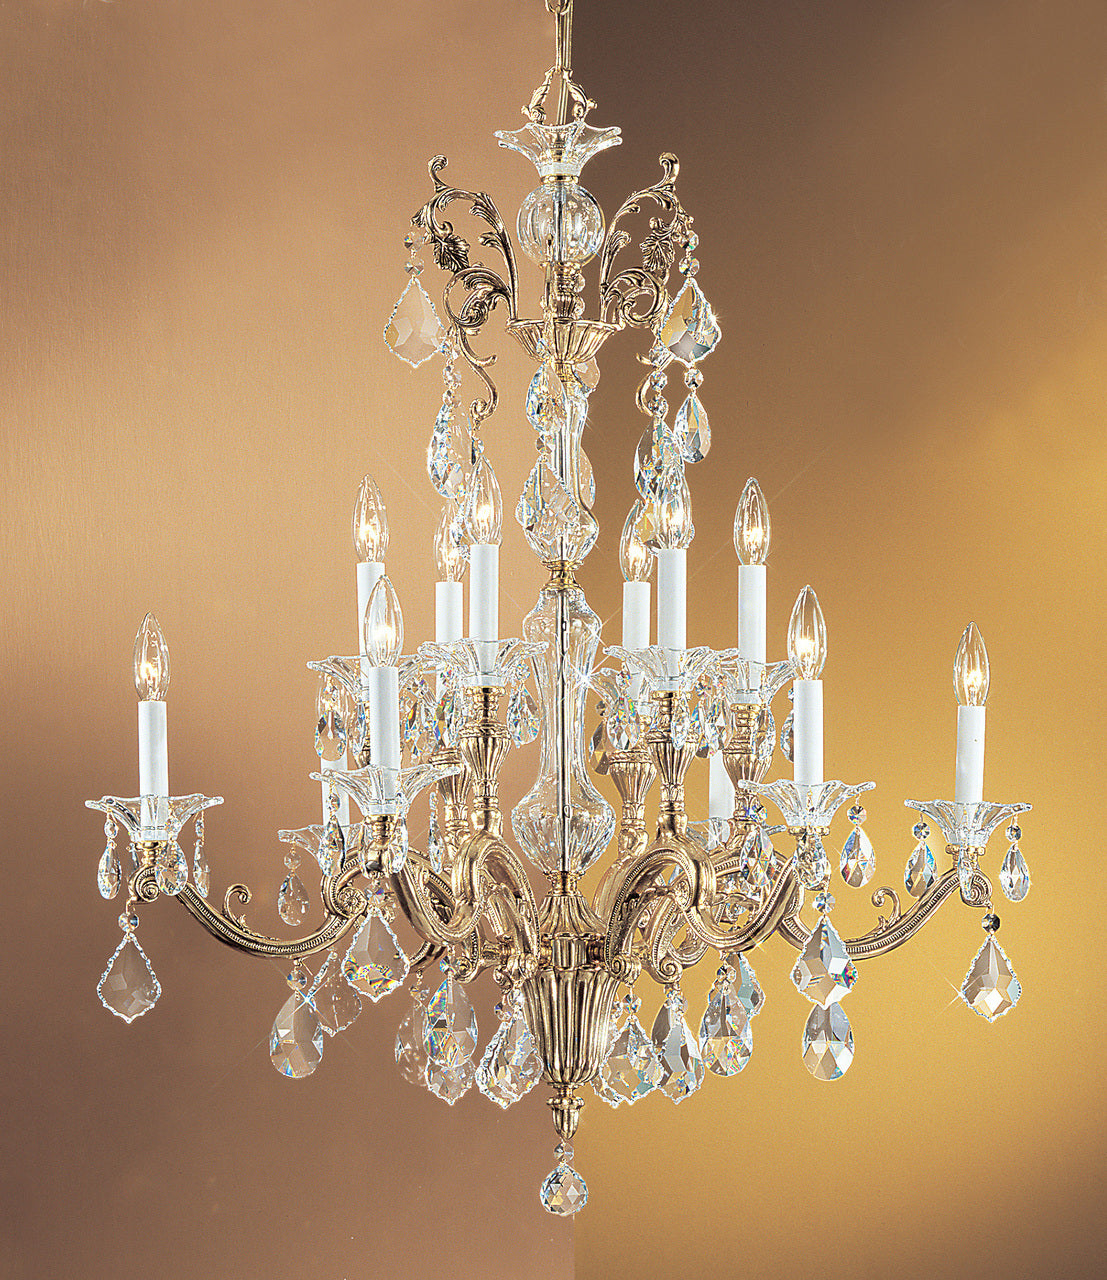 Classic Lighting 57112 BBK S Via Firenze Crystal Chandelier in Bronze/Black Patina (Imported from Spain)